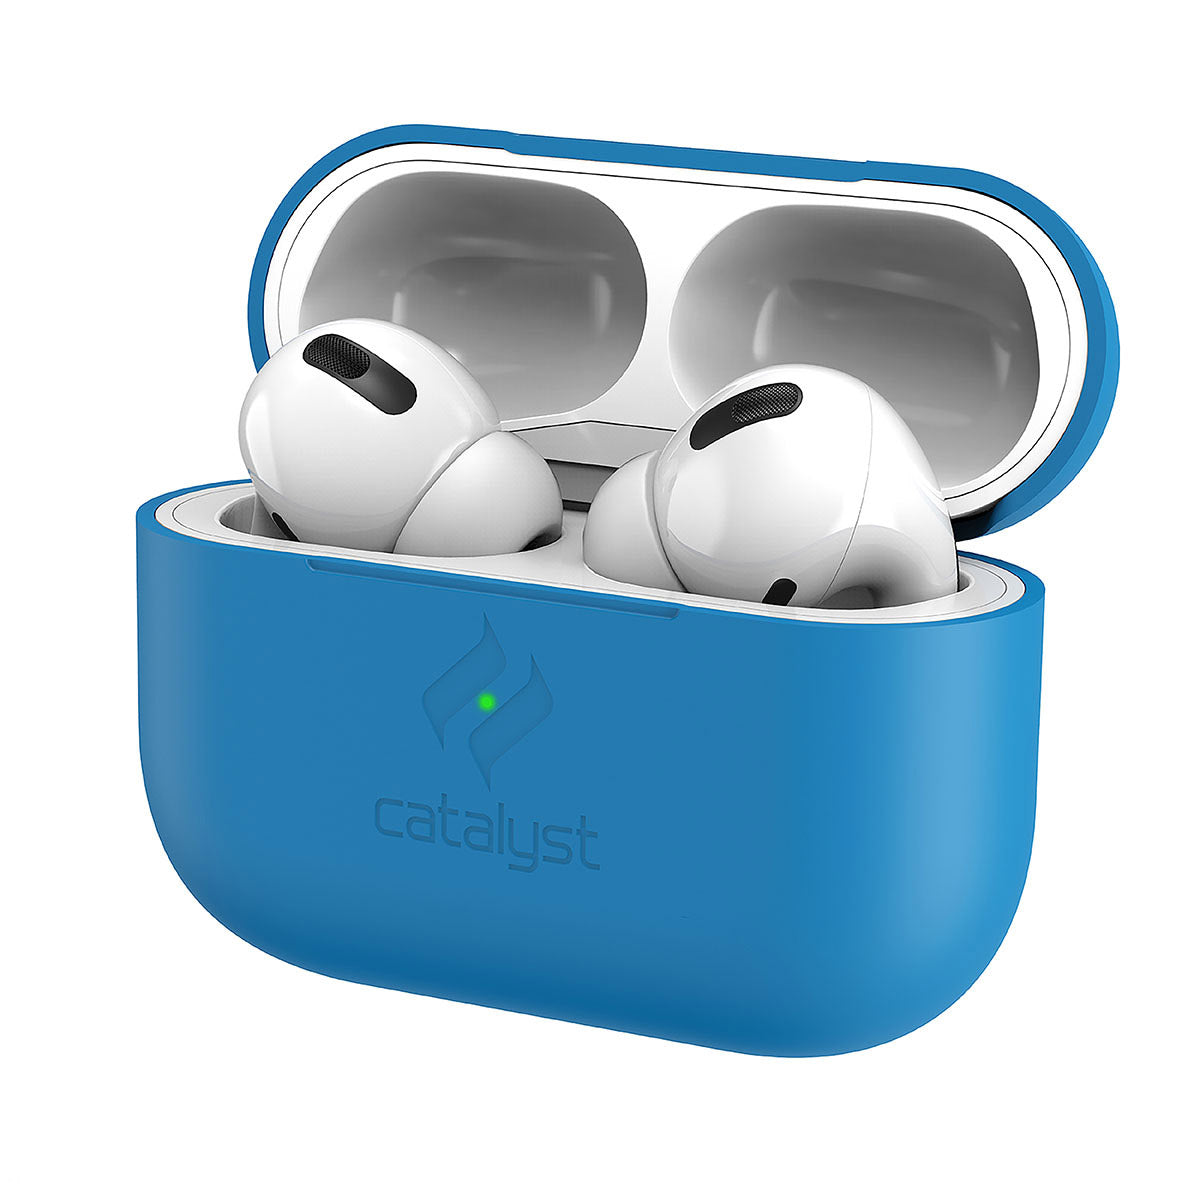 Catalyst airpods pro gen 2/1 slim case showing a closer look of front view of the case in neon blue colorway